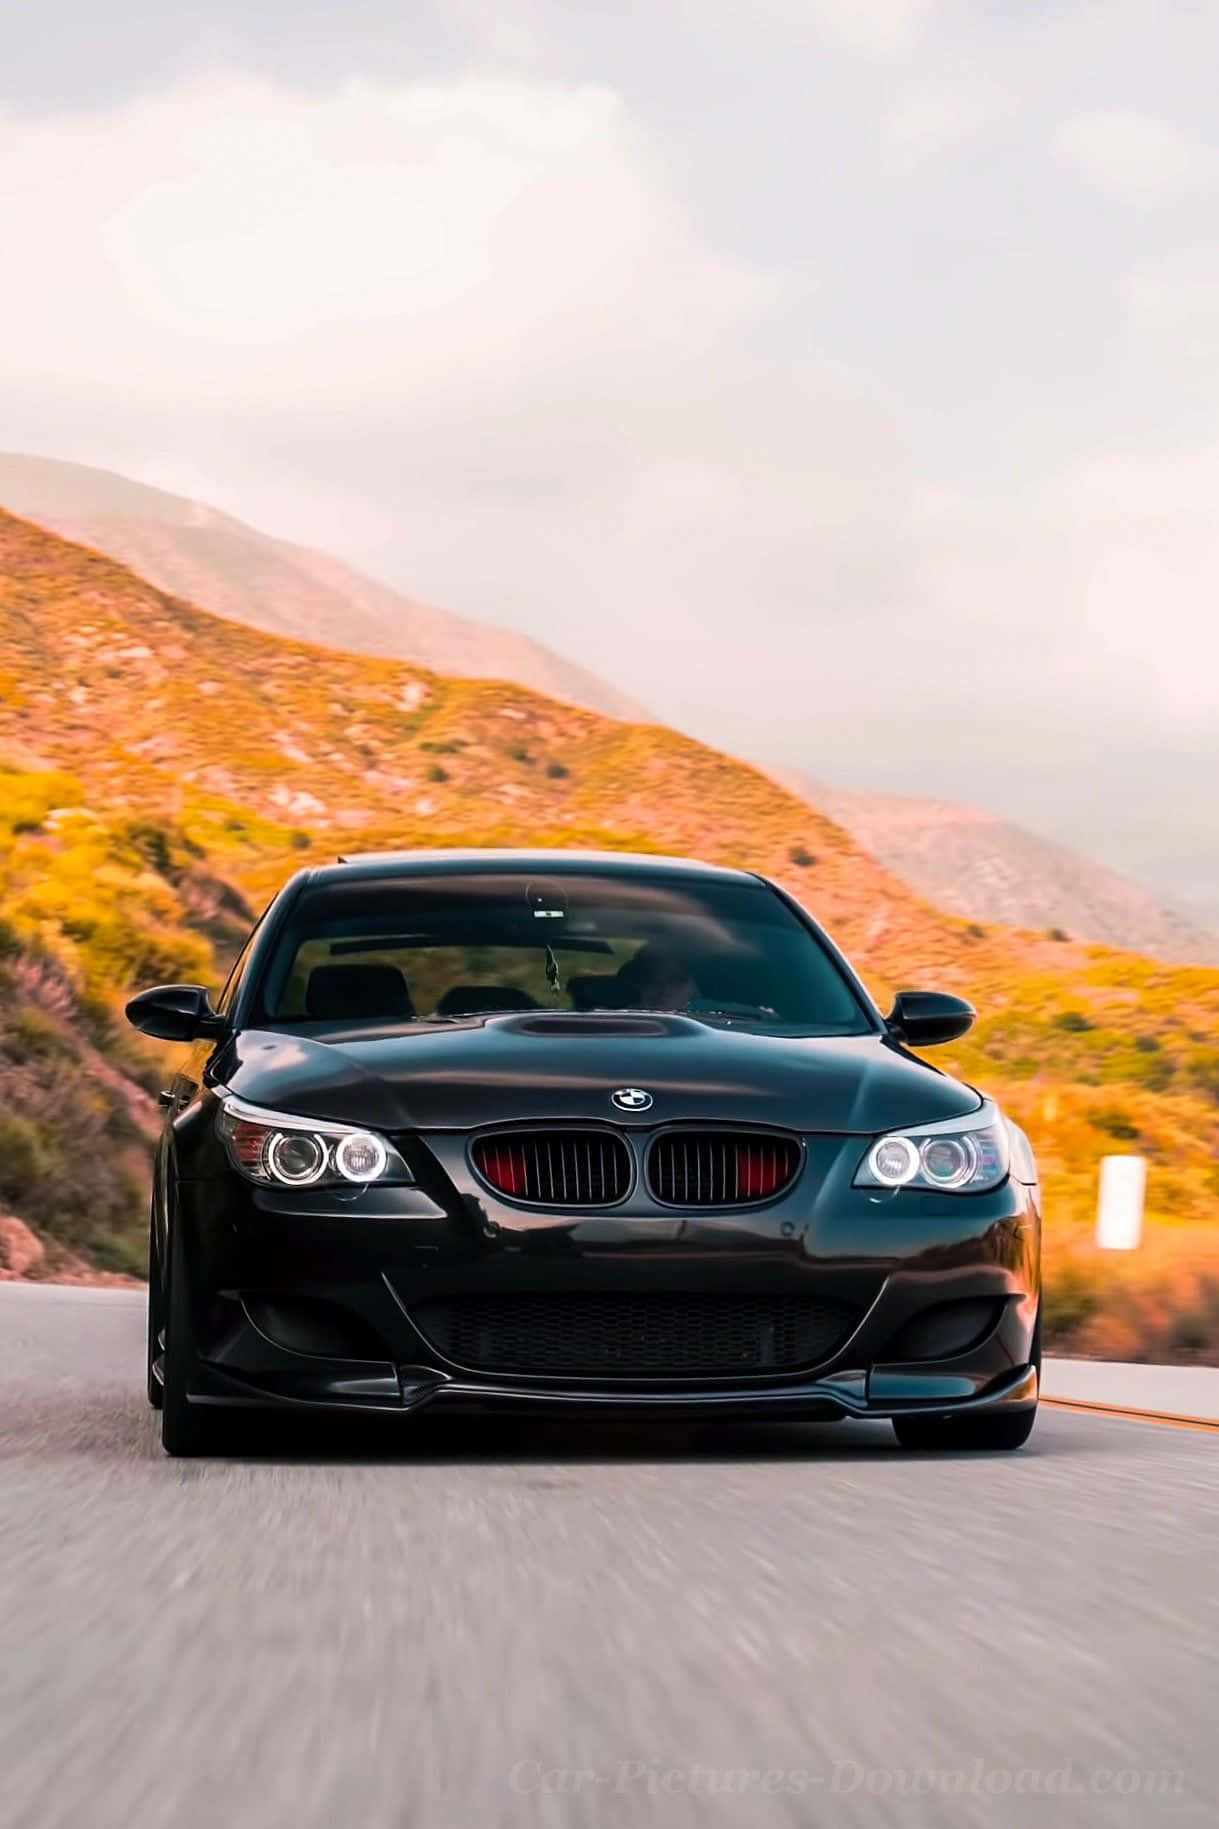 Racing-Inspired Miles in a New BMW M Wallpaper